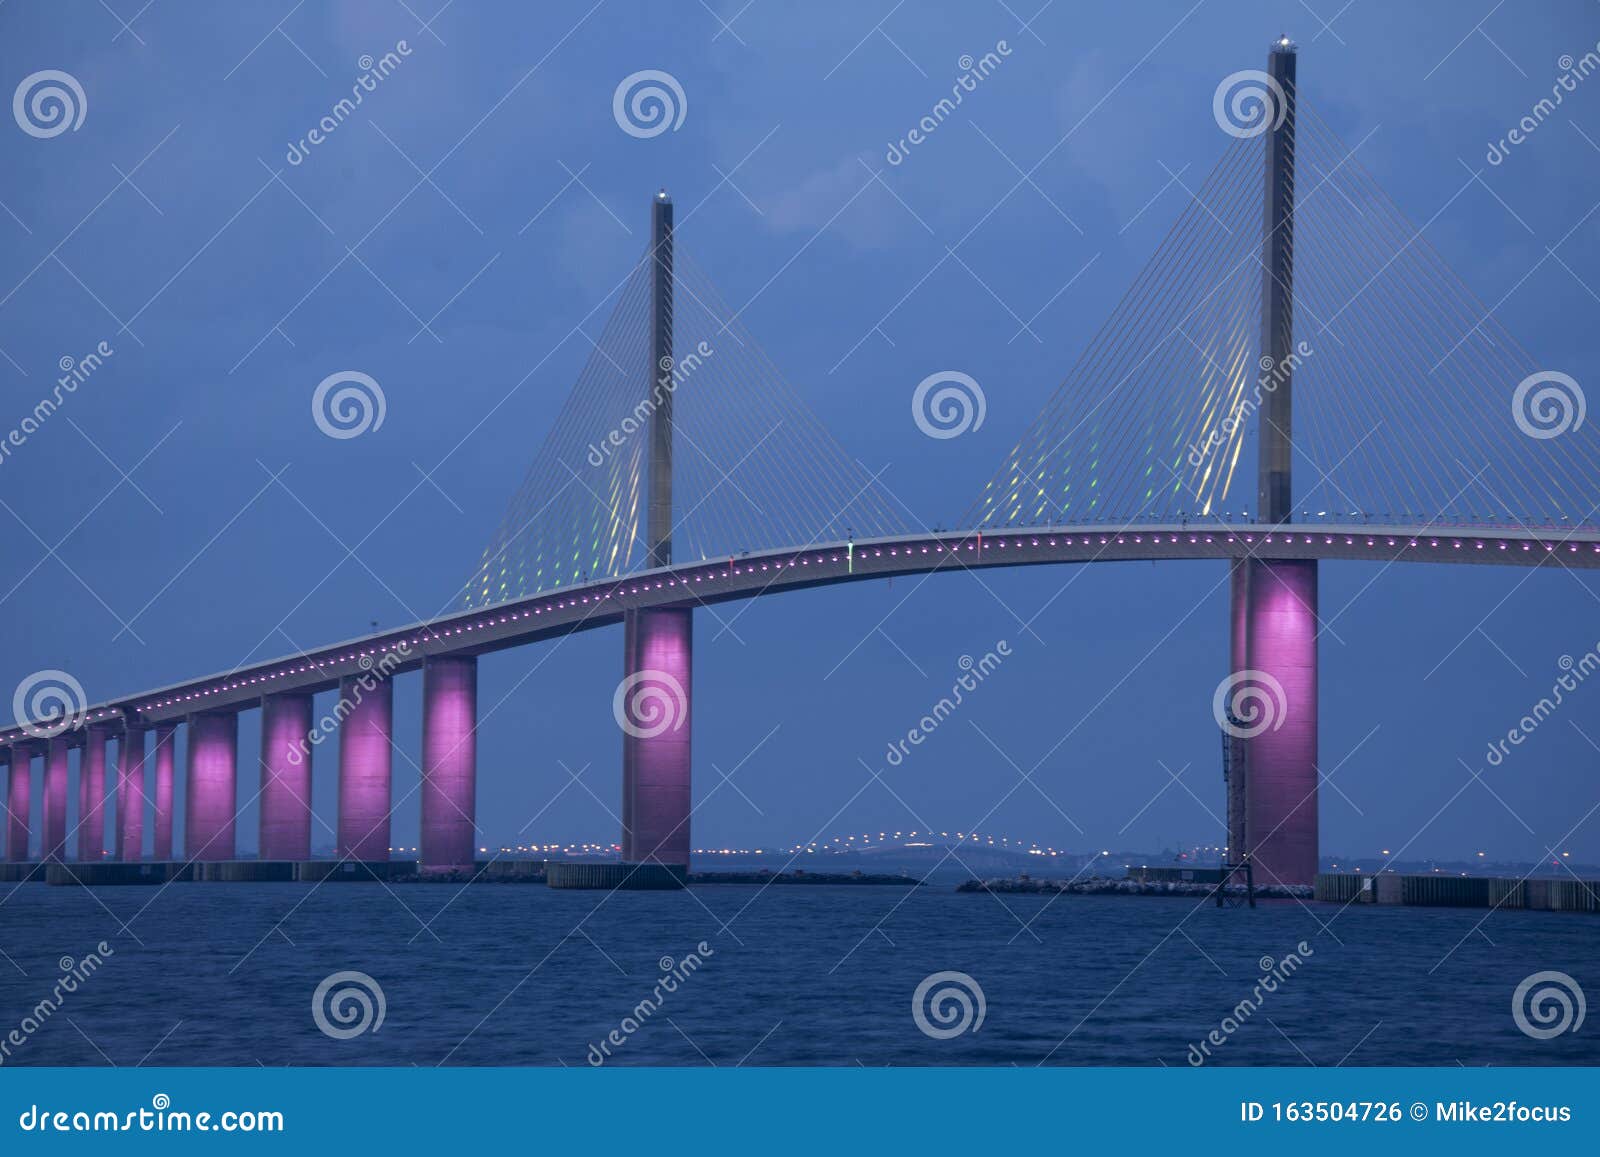 sunshine skyway bridge in tampa bay florida lit in pink lights to commemorate breast cancer awareness month